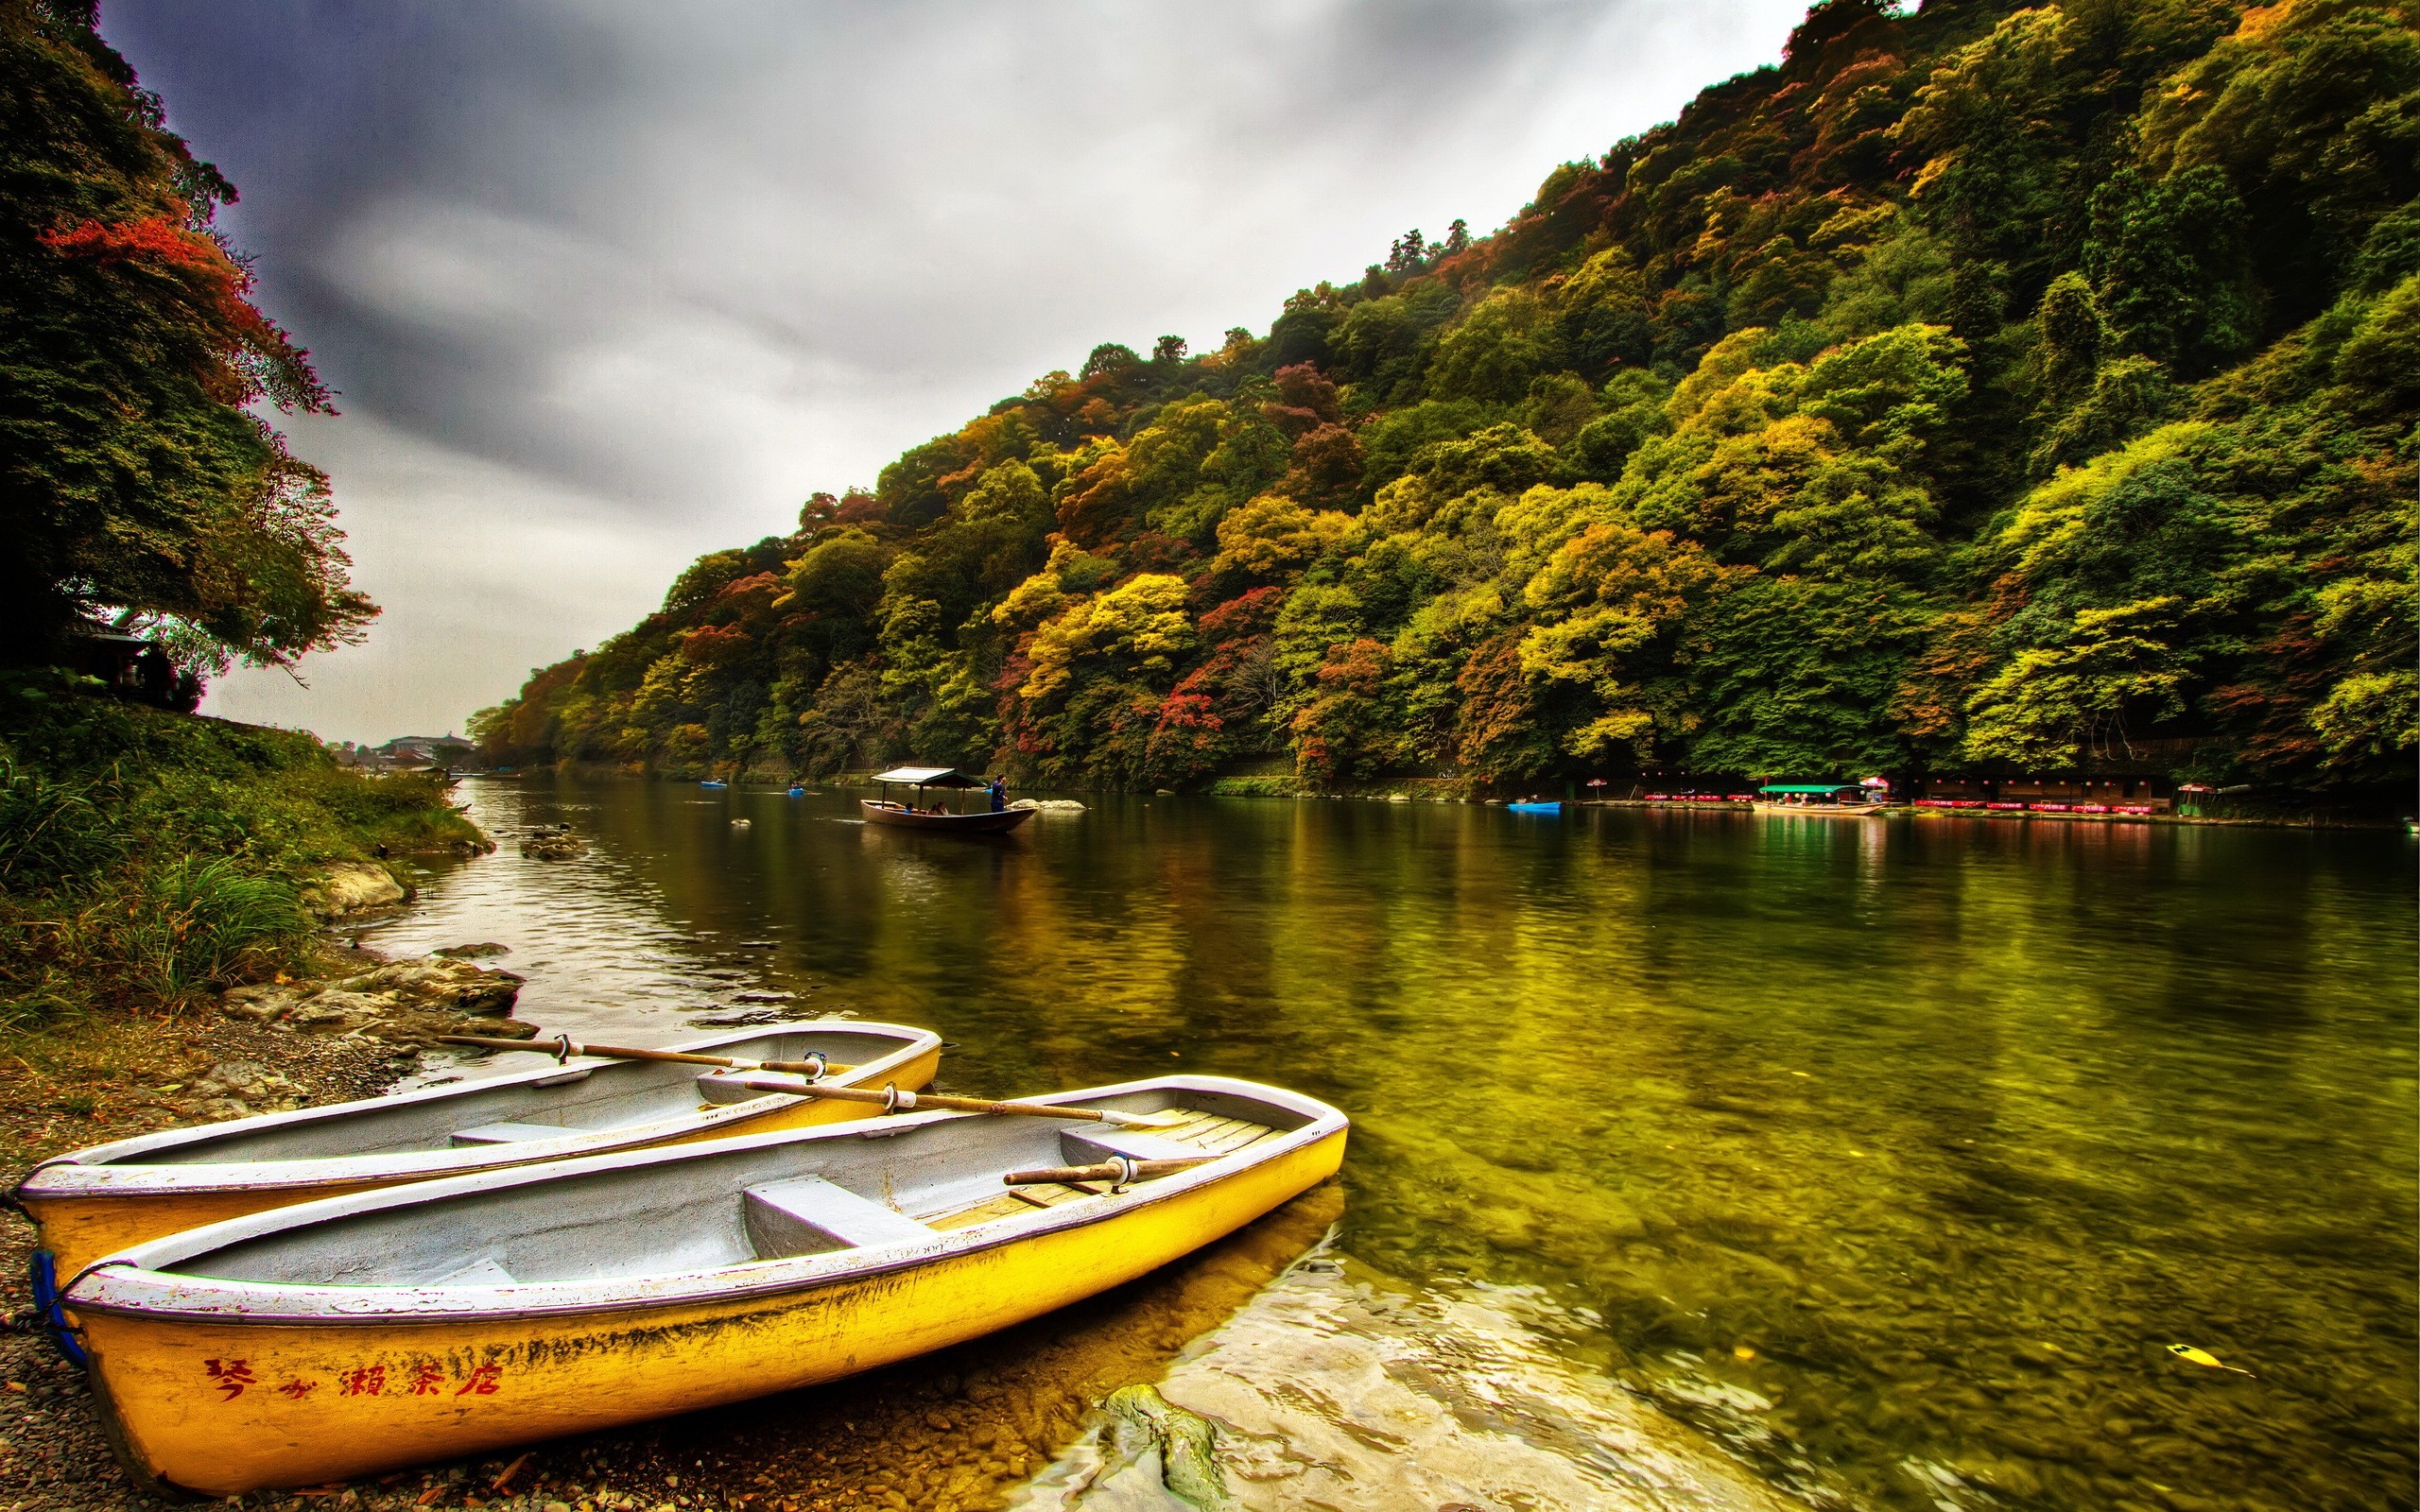 General 2560x1600 nature river boat trees landscape water